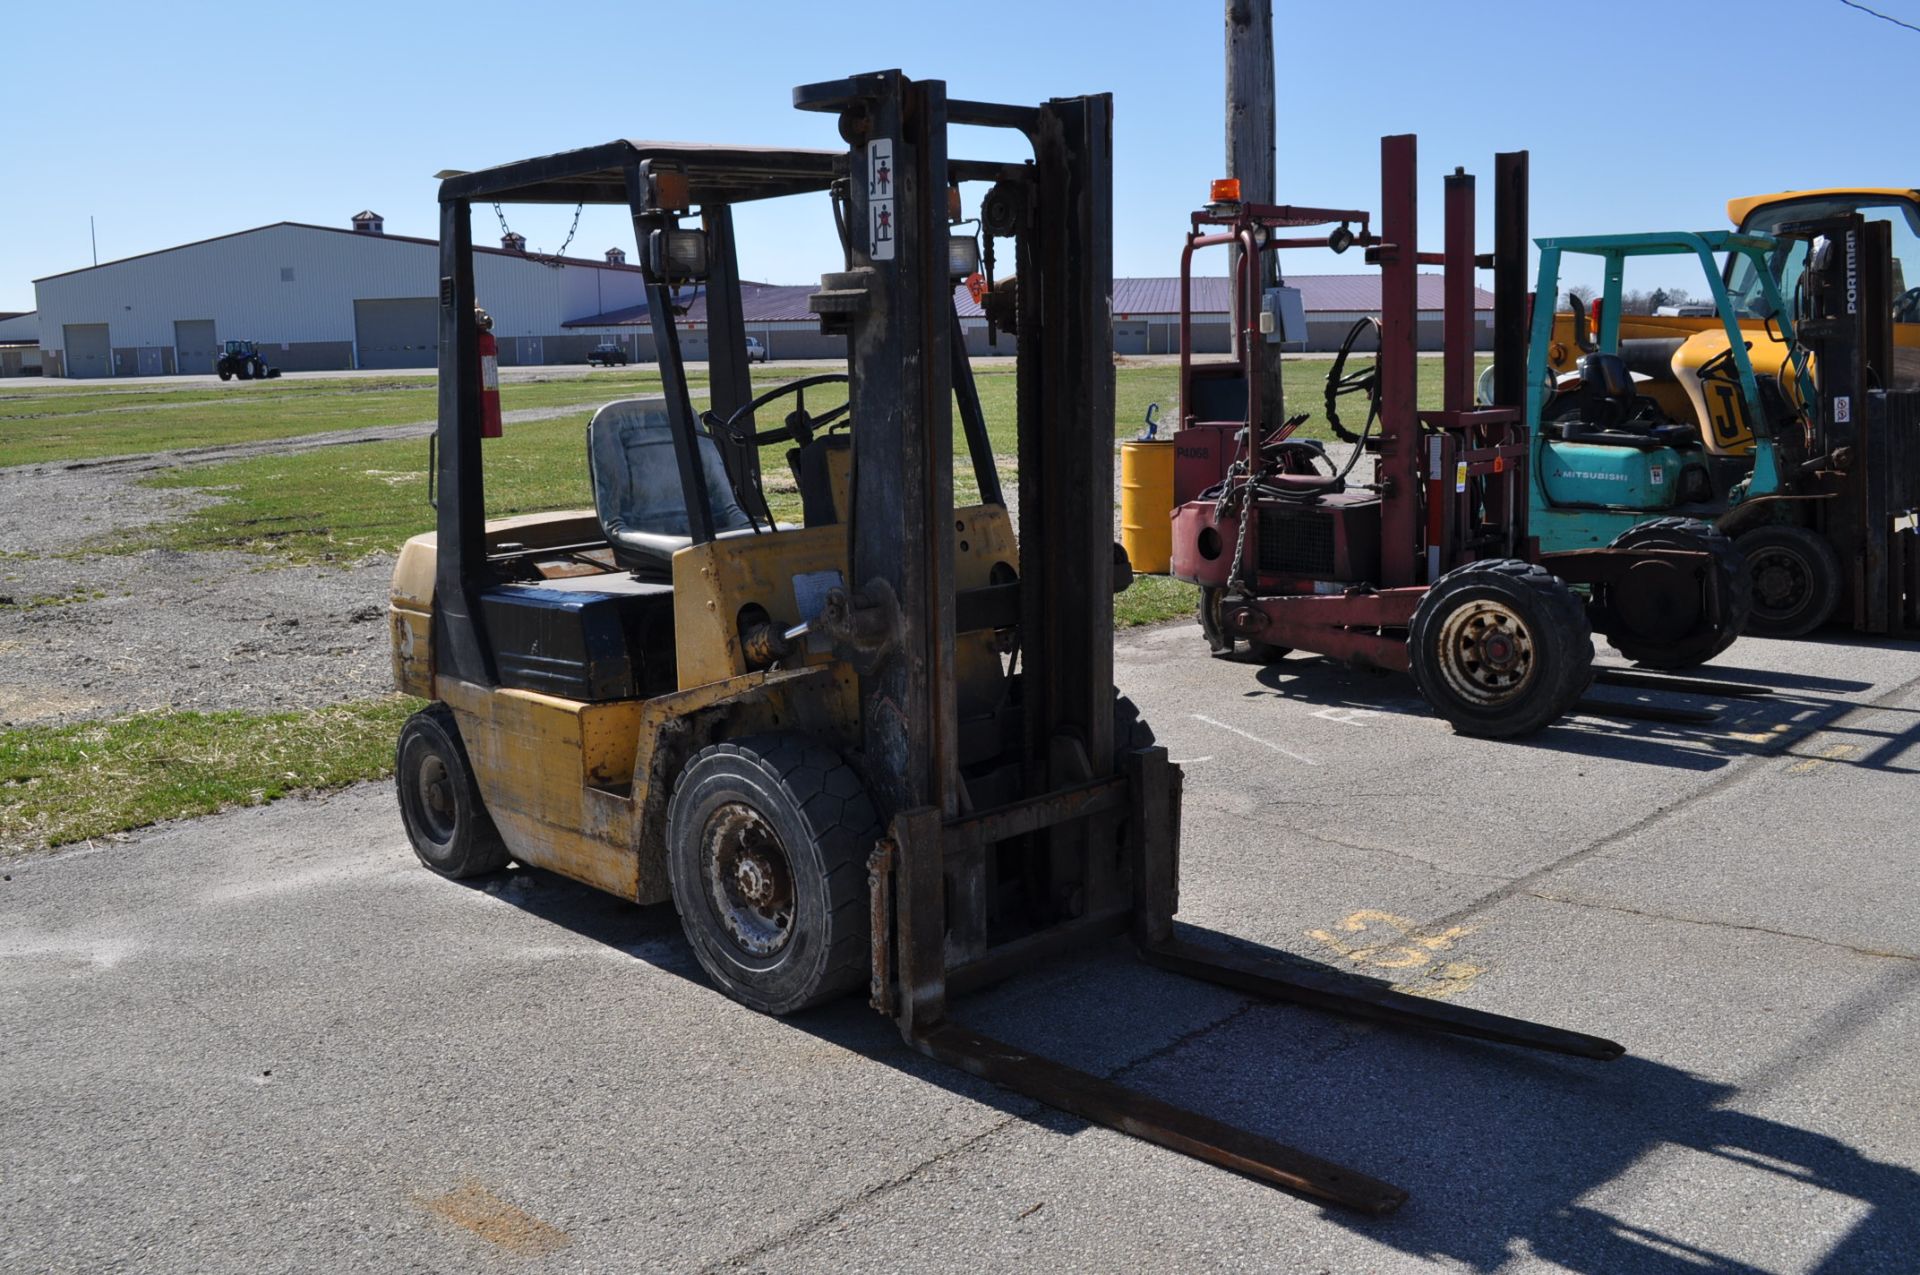 King Forklift 5000 lb capacity, pneumatic tires, gasoline engine, SN AN428 - Image 4 of 6